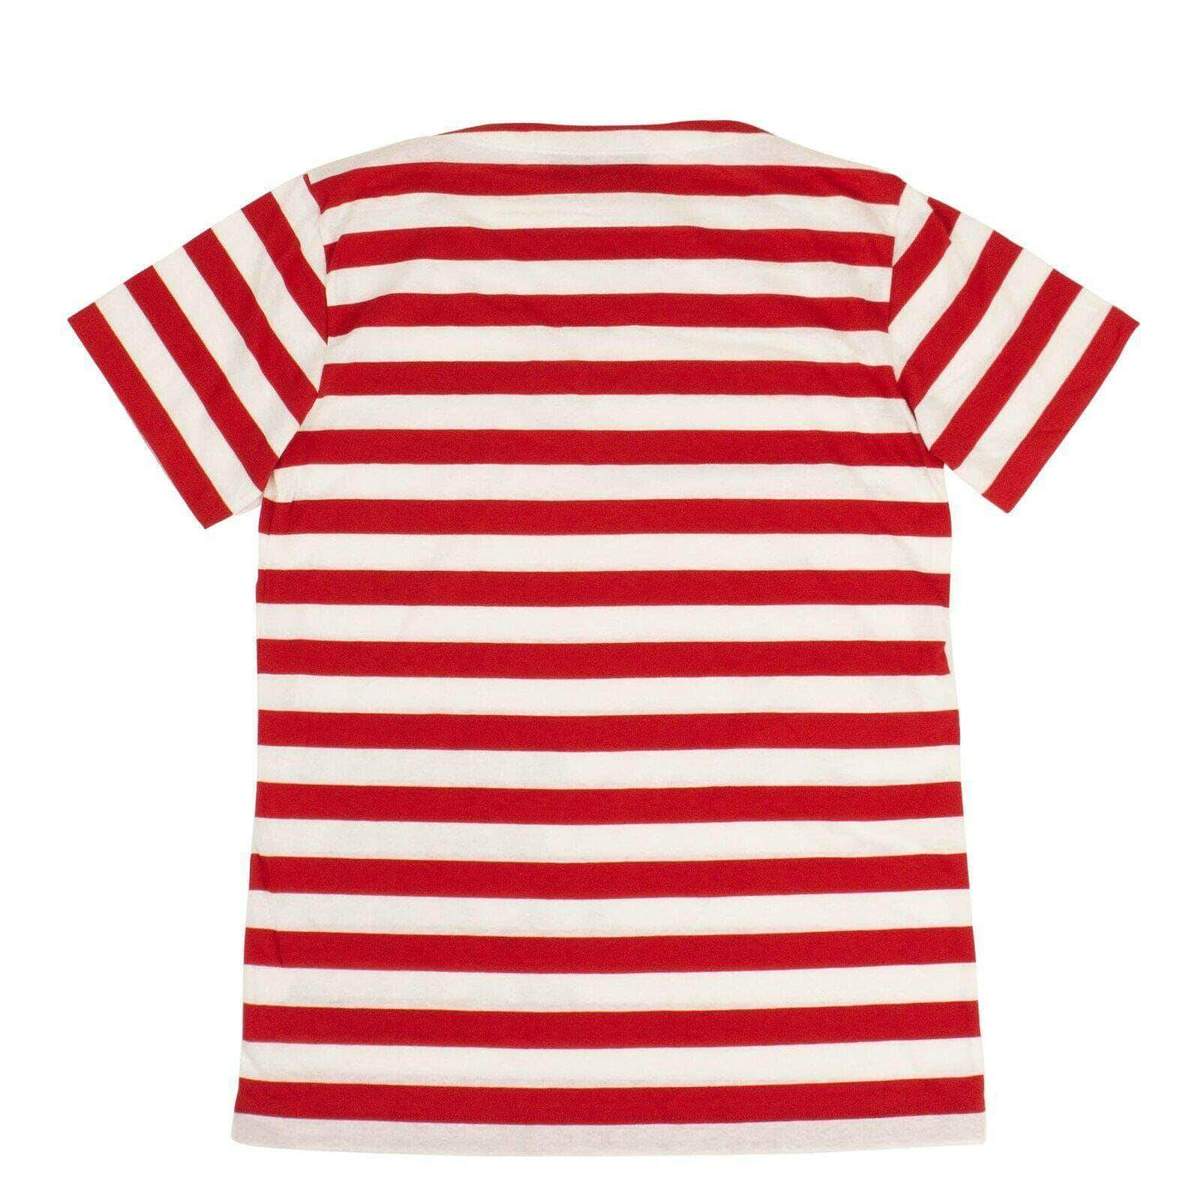 red and white striped shirts for women